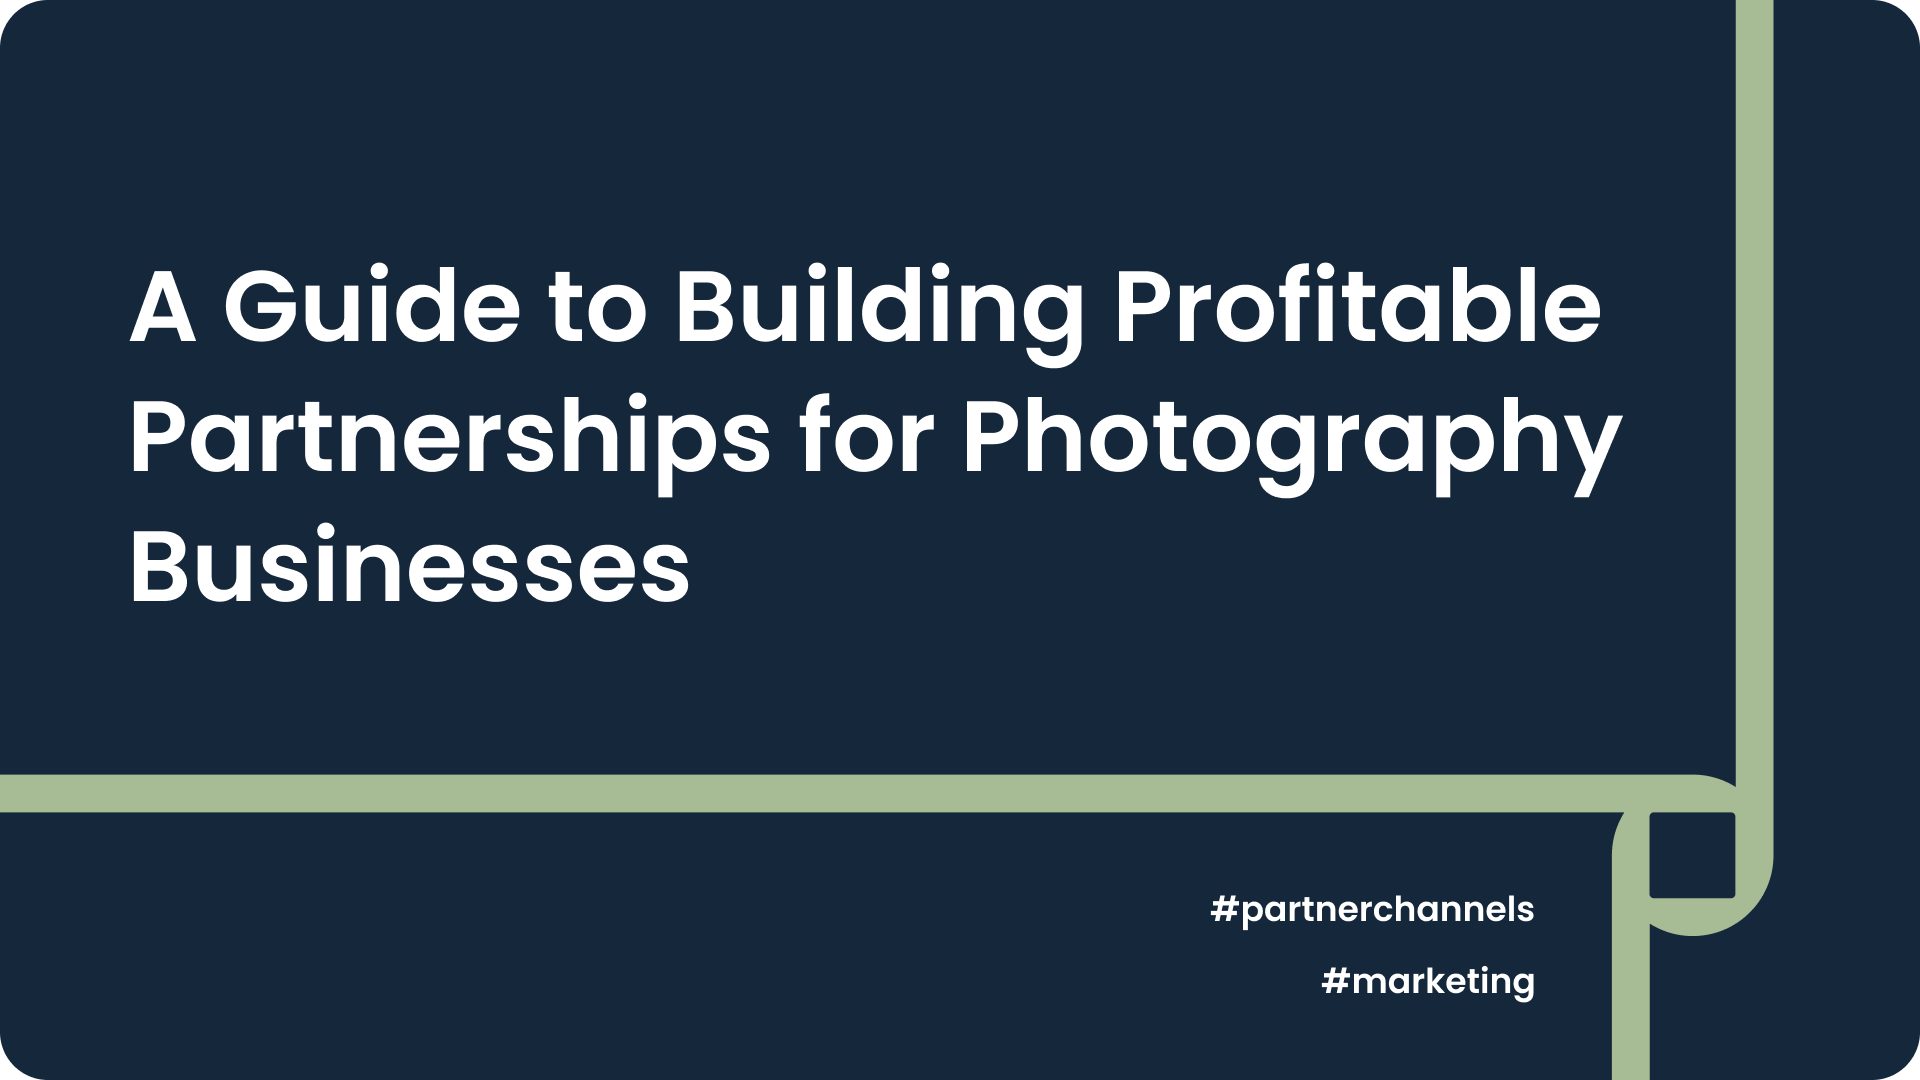 A Guide to Building Profitable Partnerships for Photography Businesses